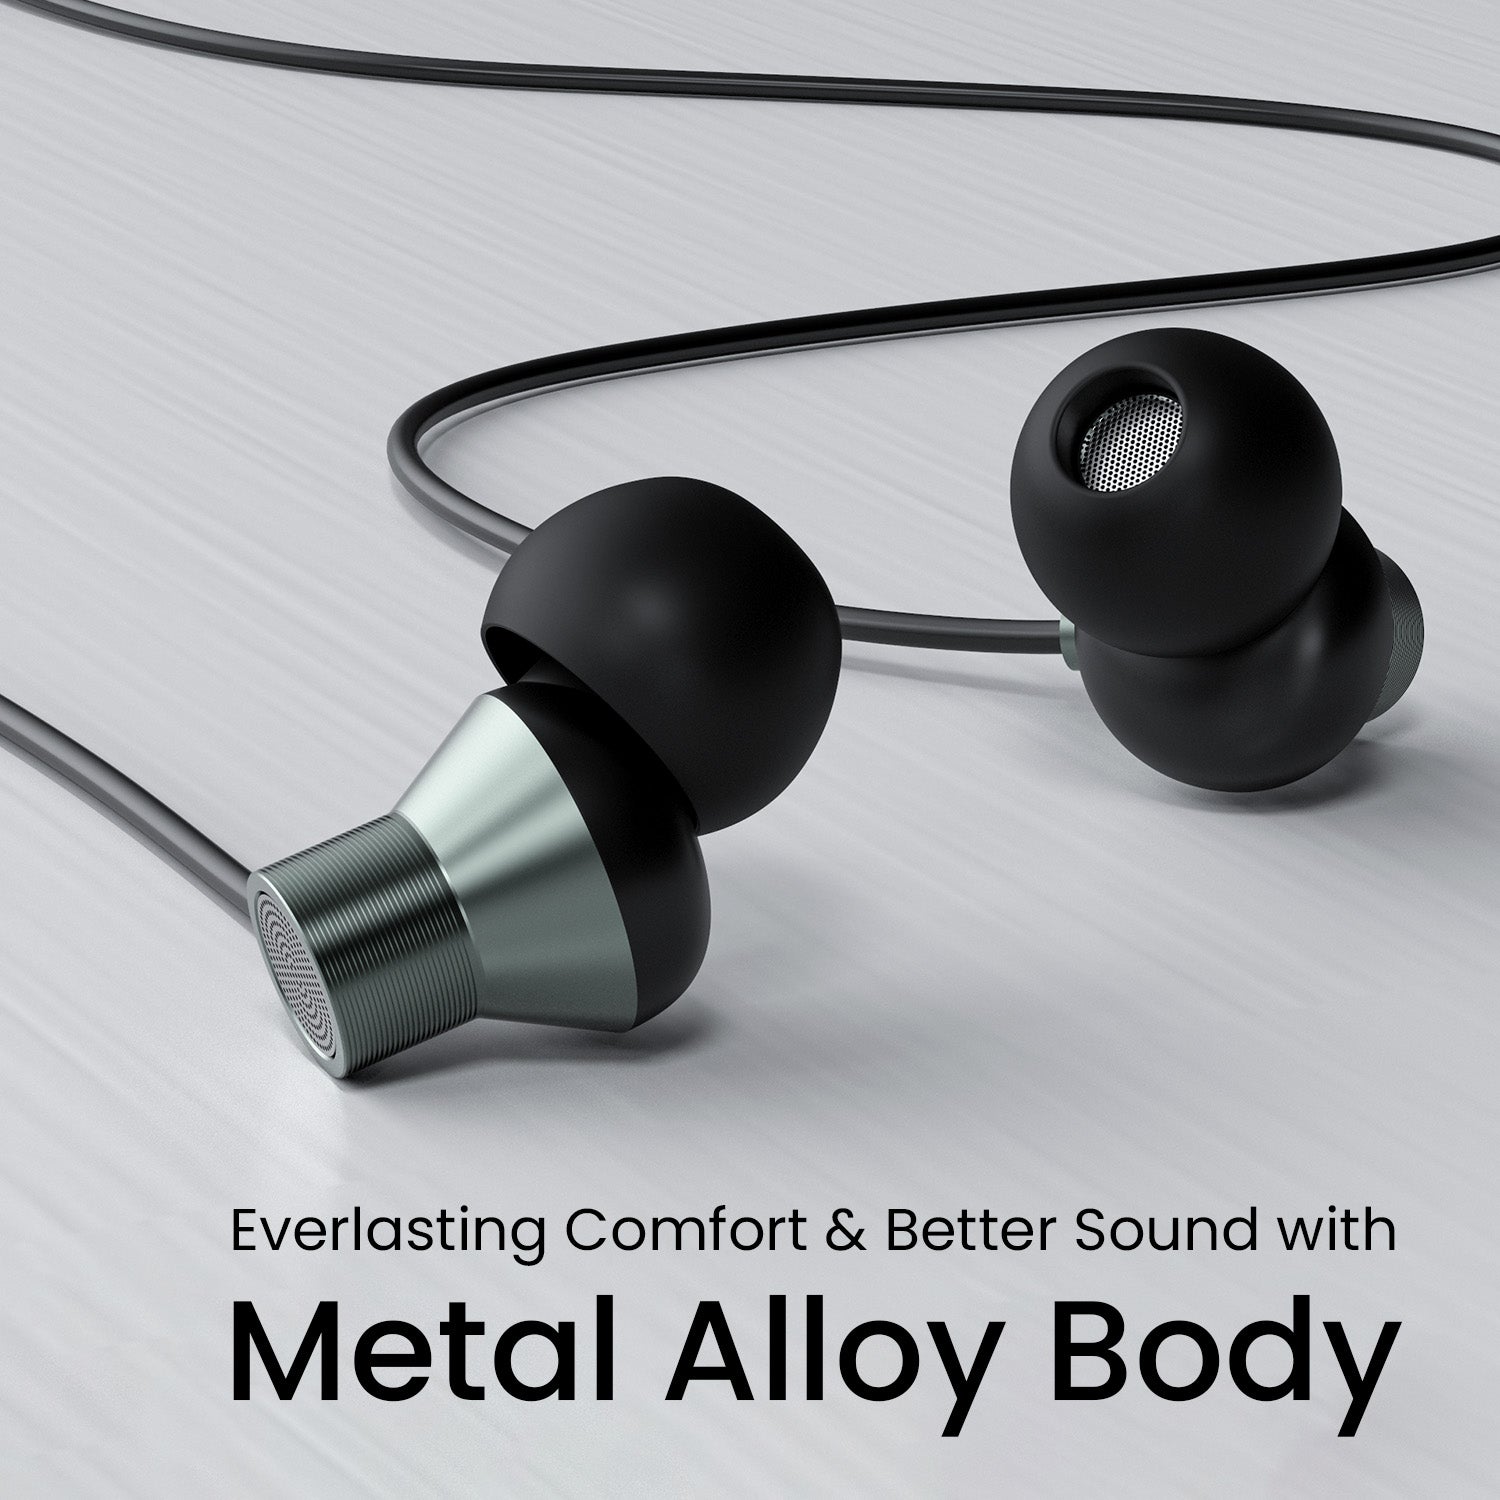 Black Portronics conch tune A wired earphone with metal alloy body